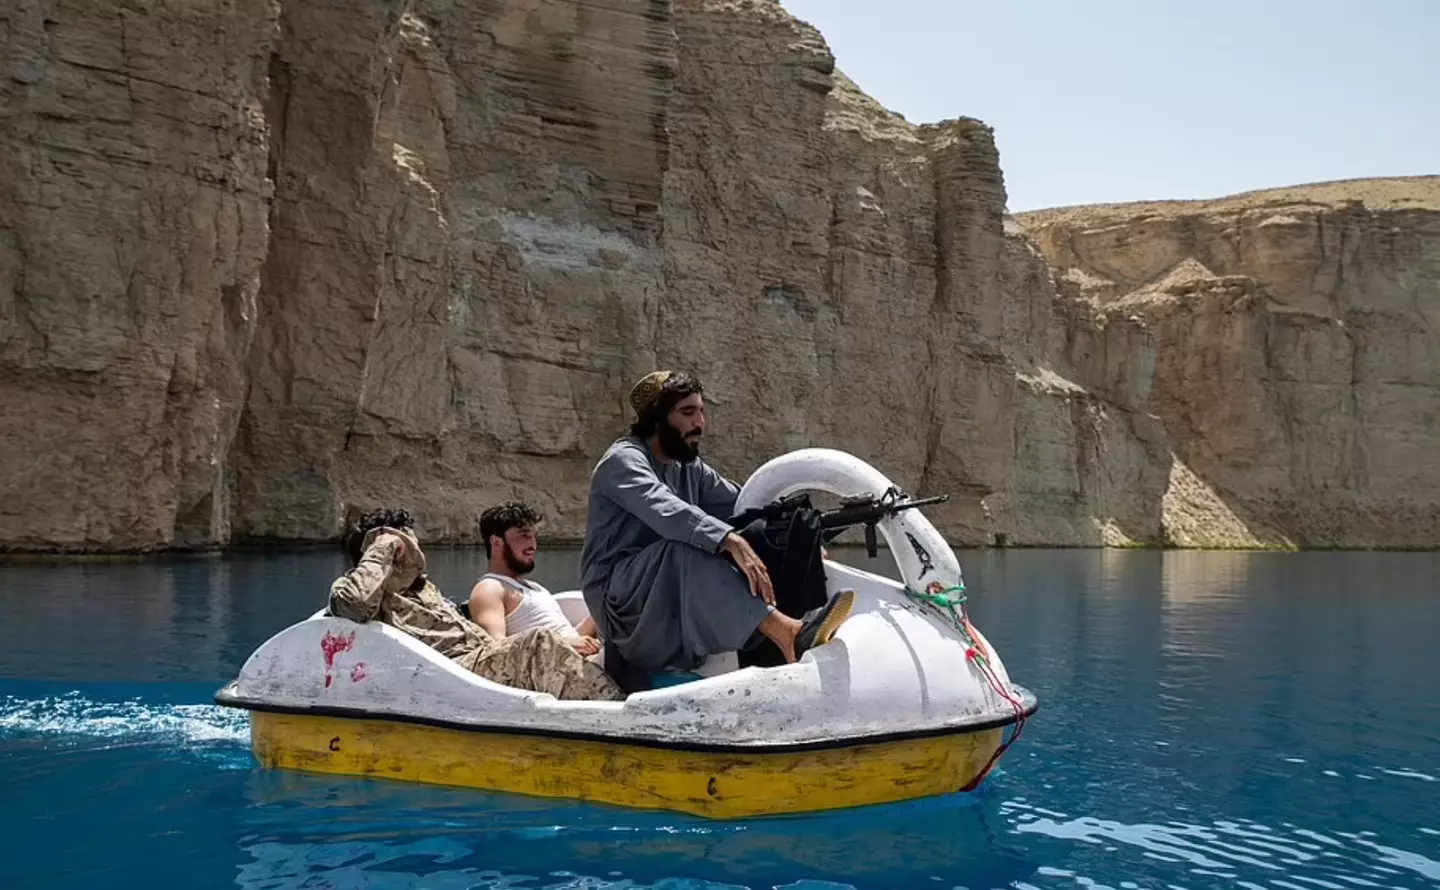 Many of the Taliban soldiers Took their guns on the boats.